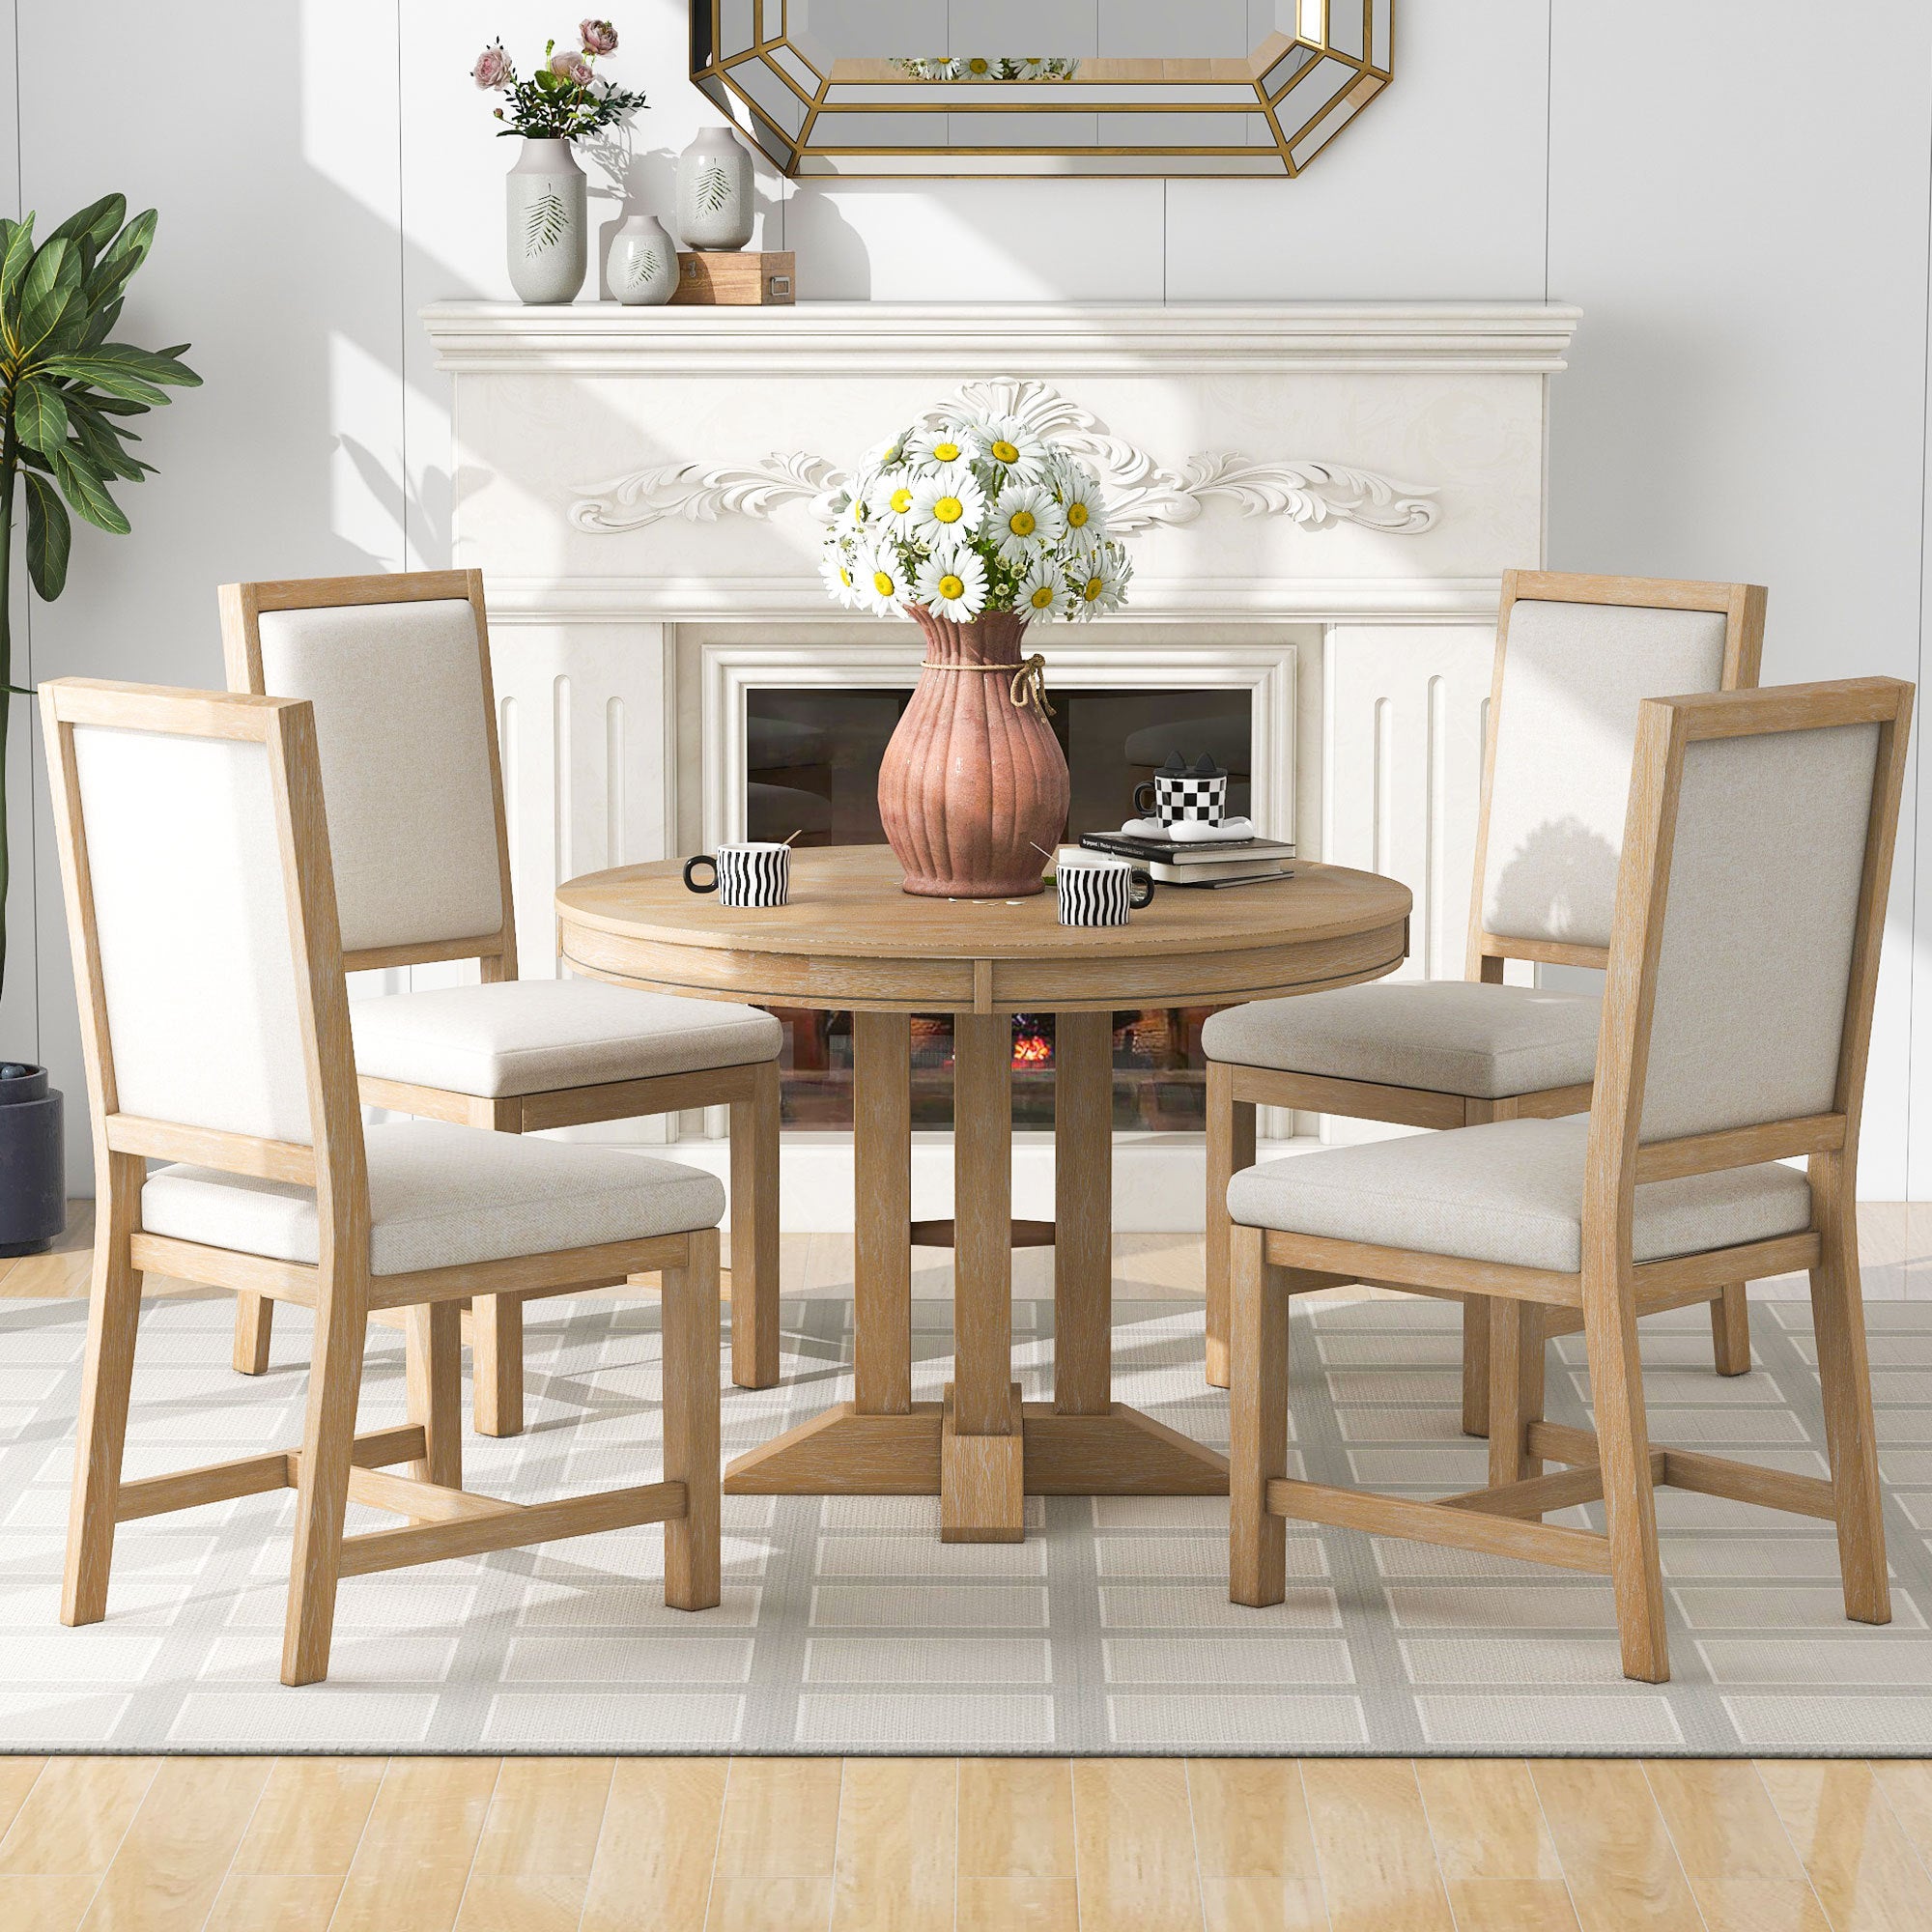 5-Piece Dining Set Extendable Round Table and 4 Chairs Farmhouse Dining Set - Natural Wood Wash